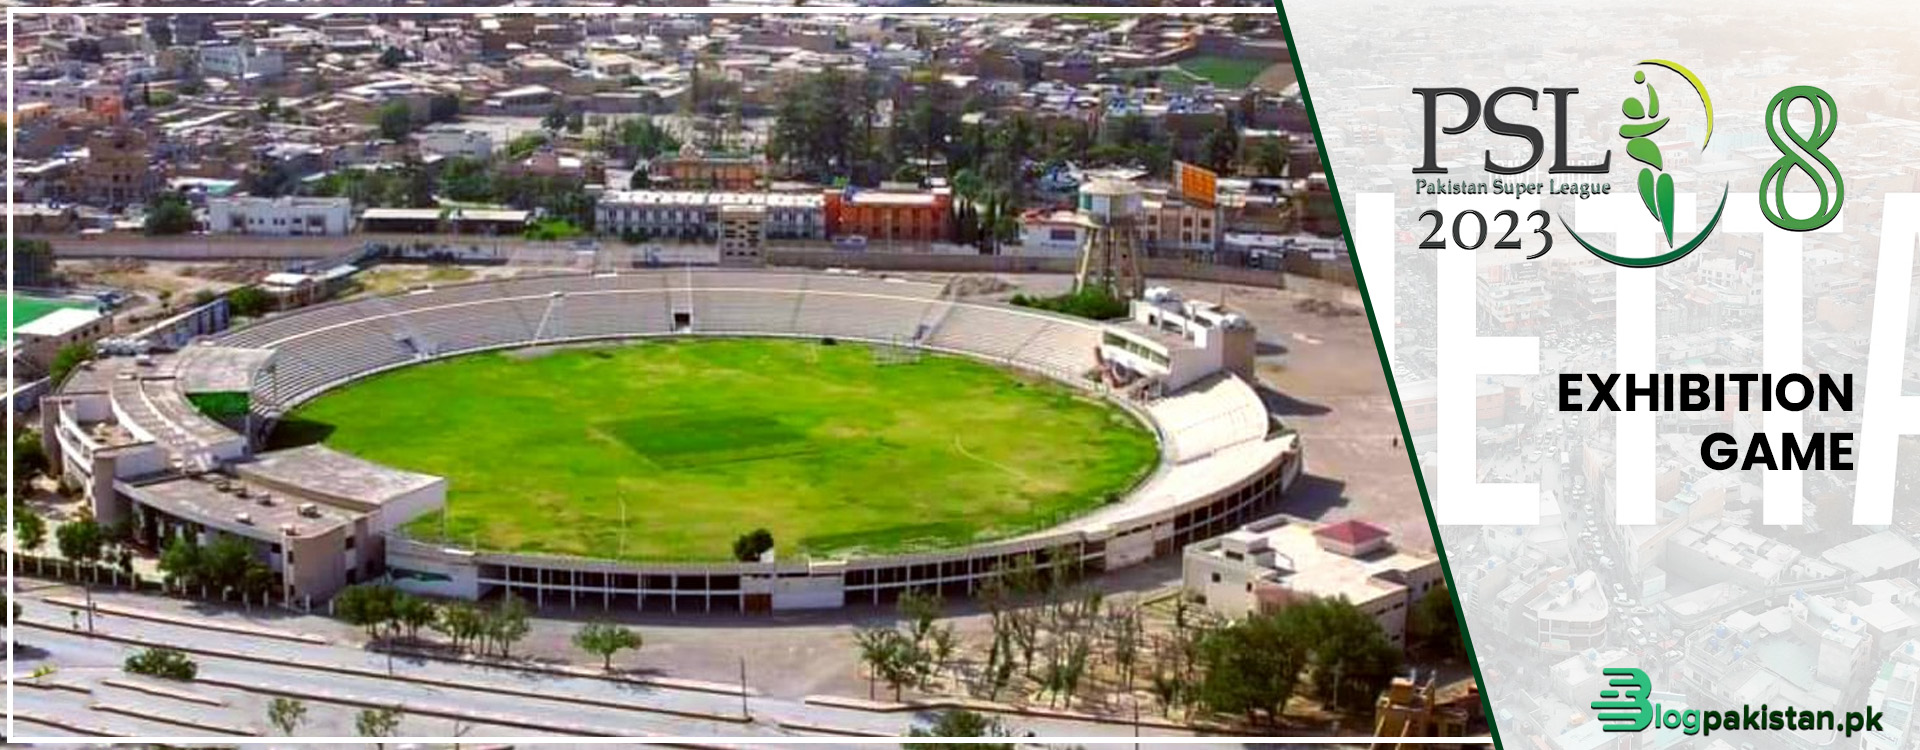 Exhibition Match of PSL 8 to be Held in Quetta